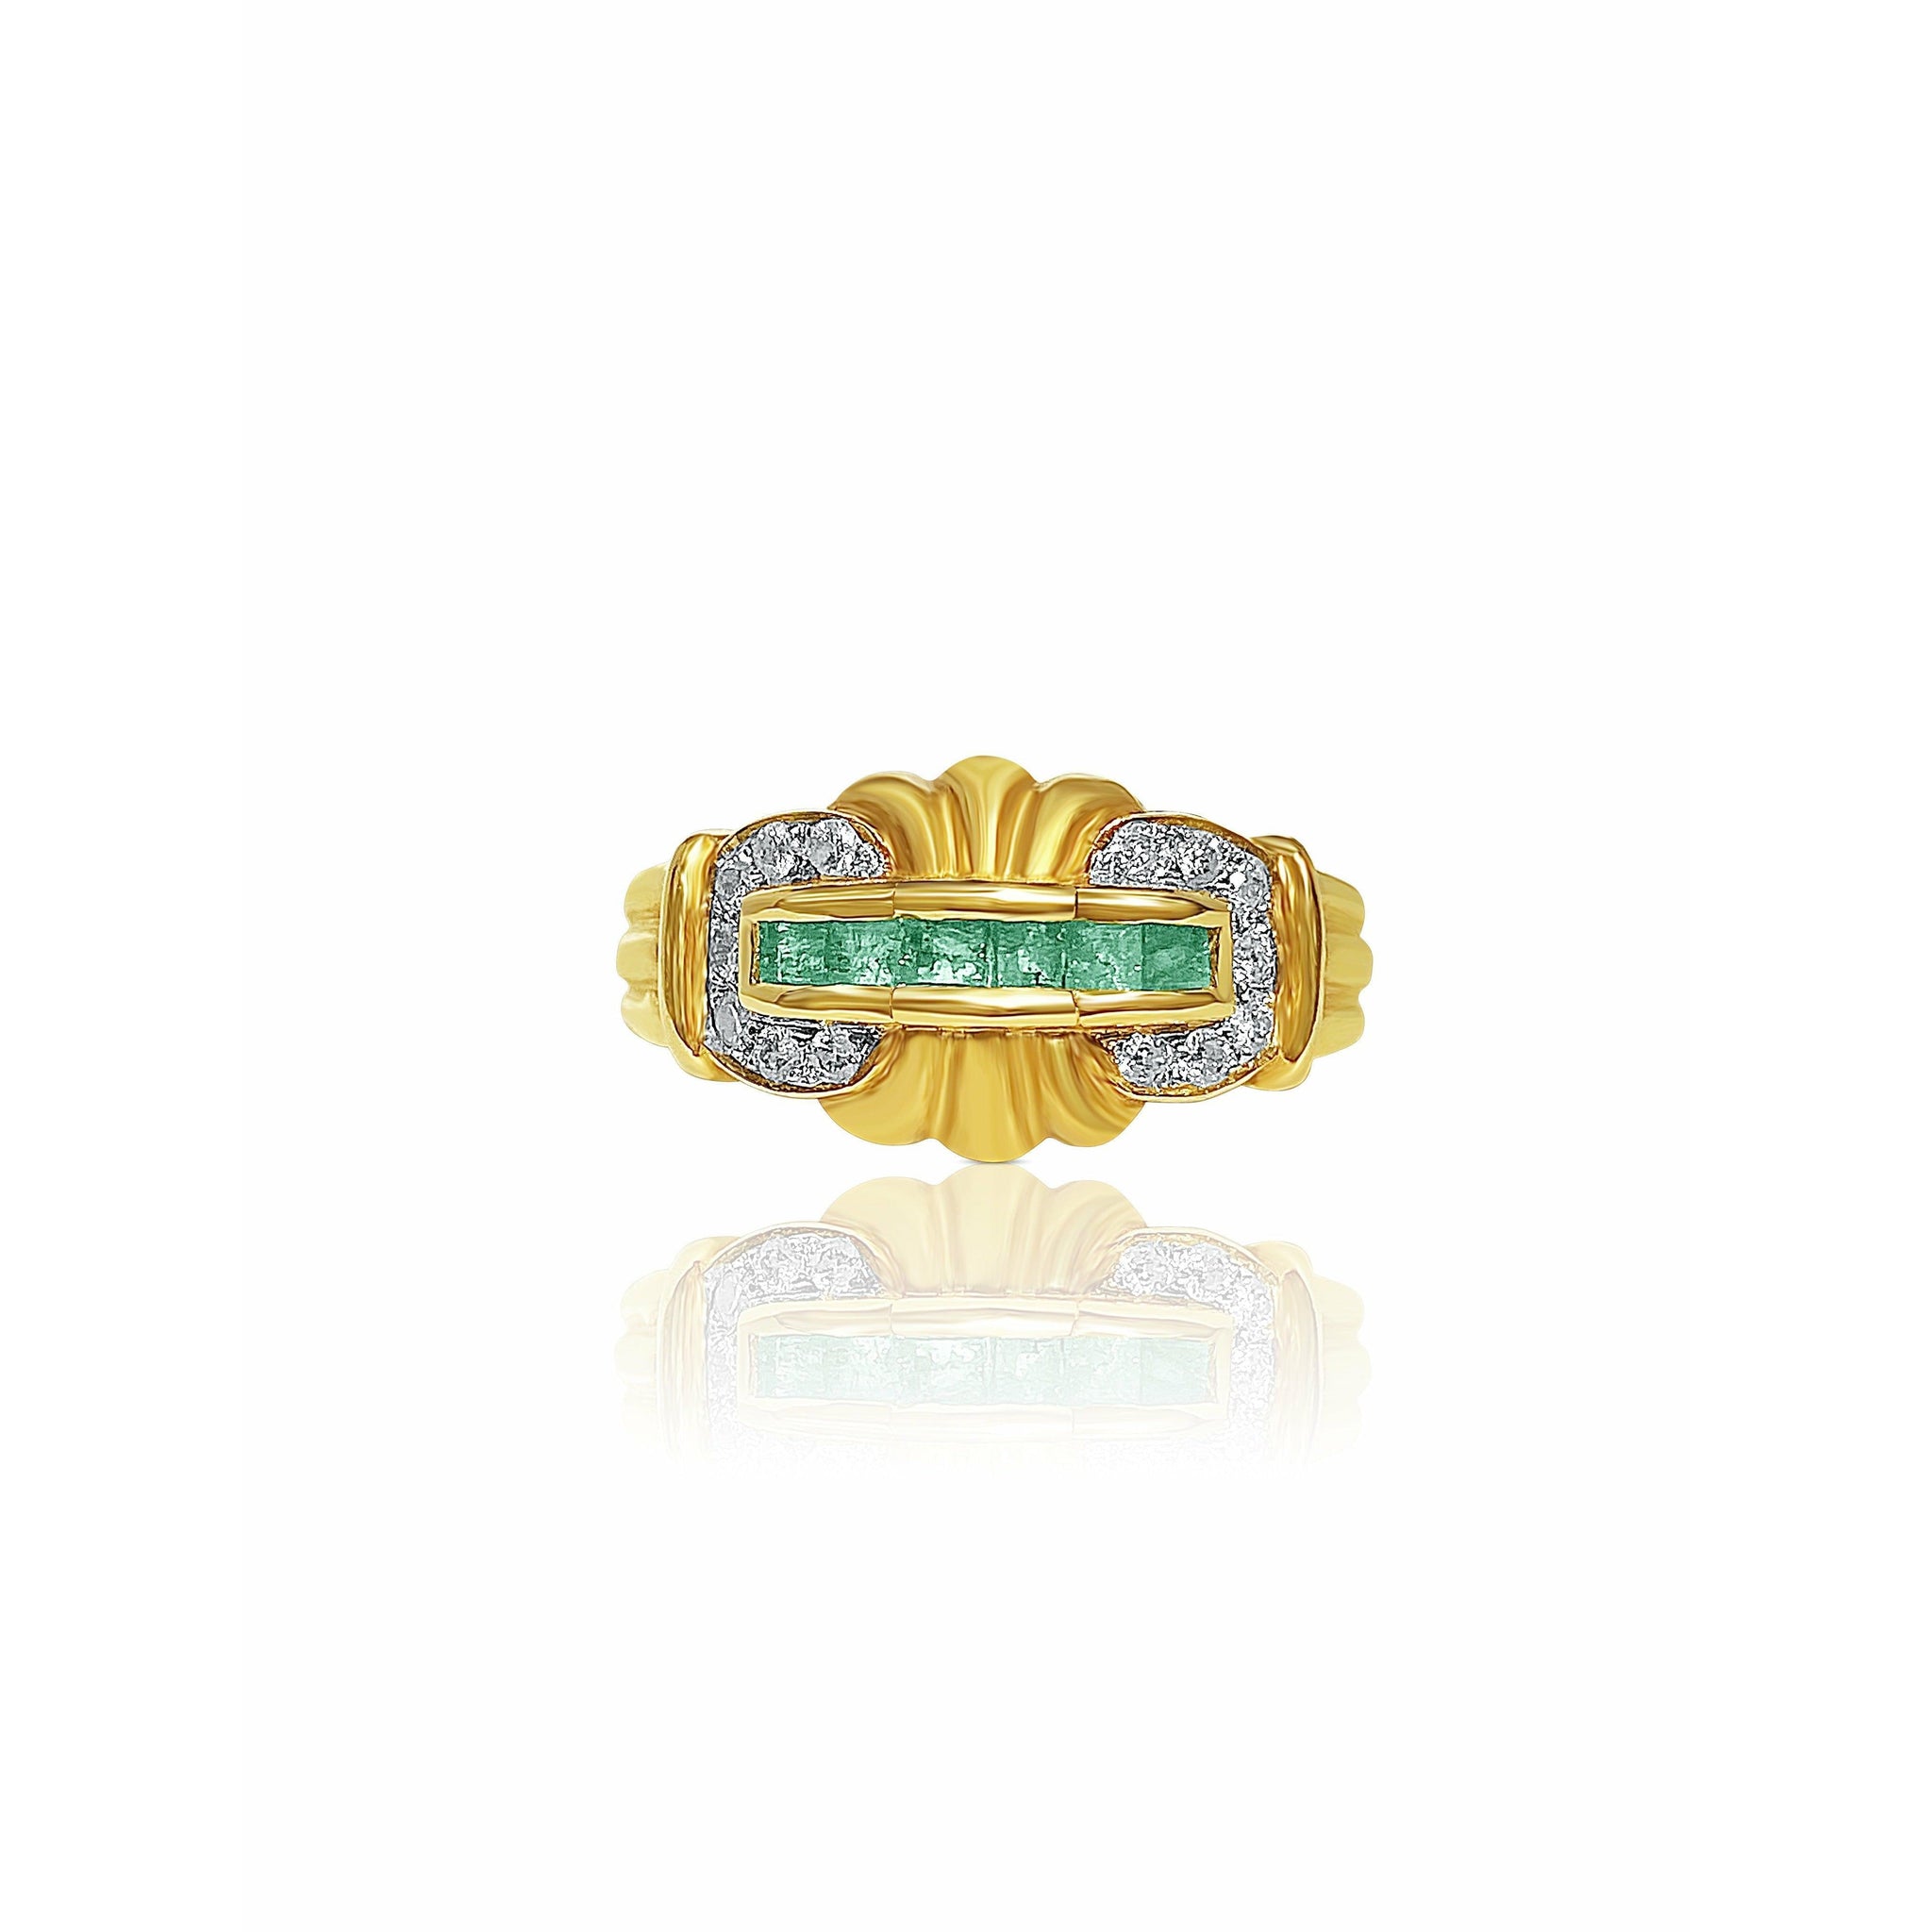 Vintage Baguette Cut Emerald Ring in 14k yellow Gold - ASSAY